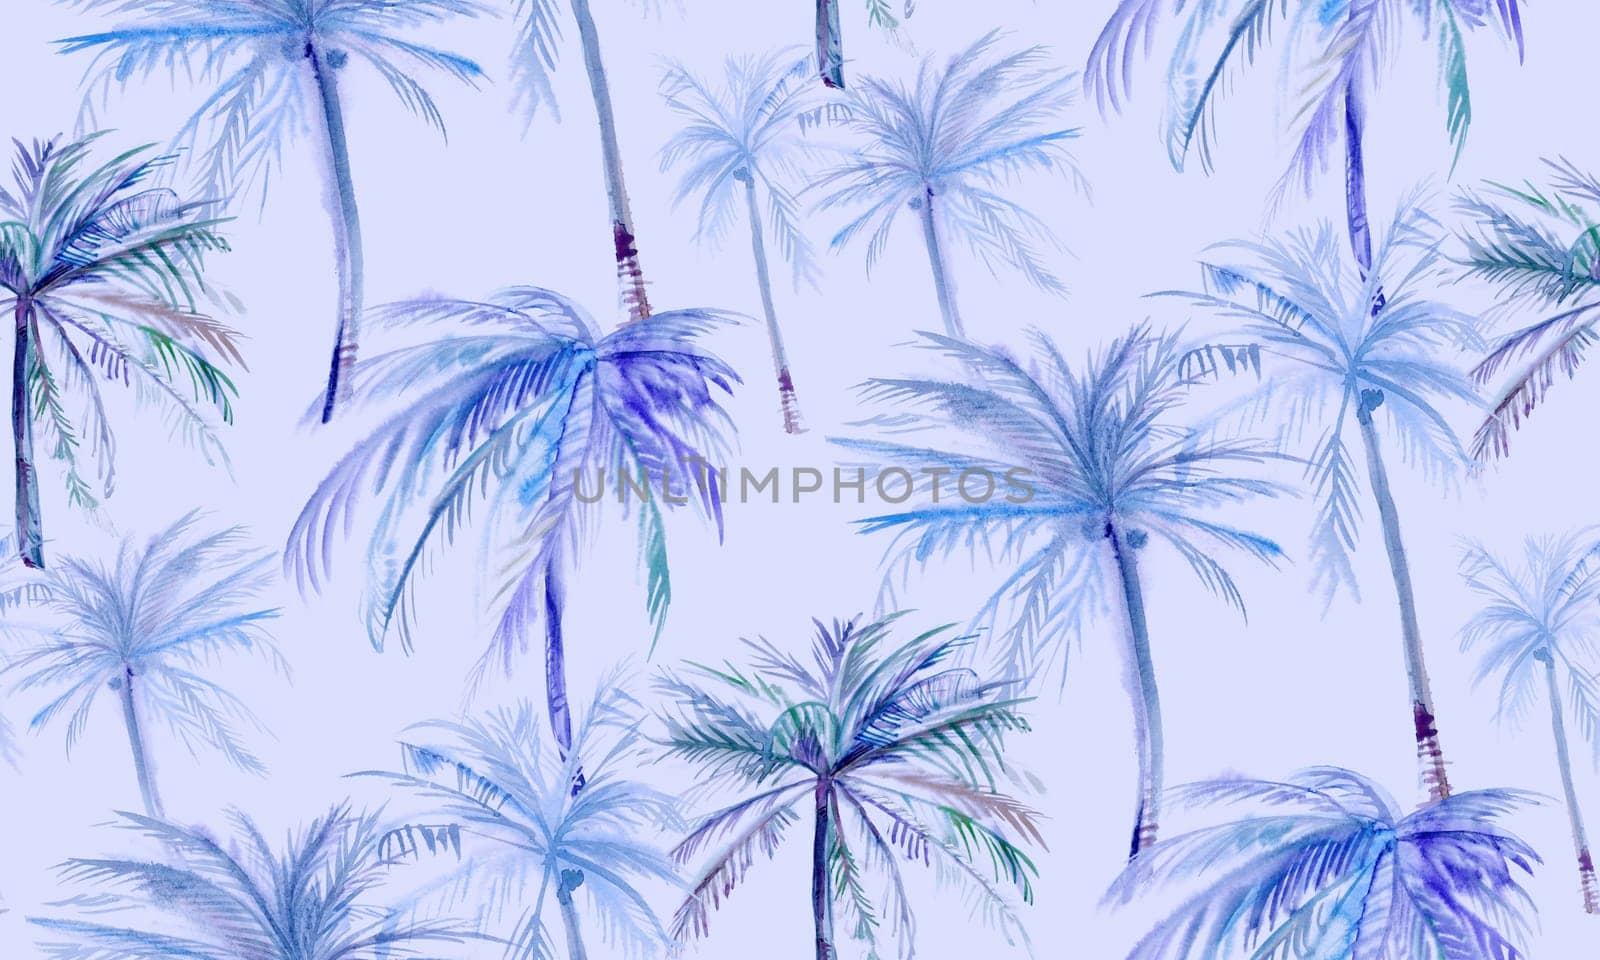 Subdued tropics on a lilac pattern with coconut trees painted in watercolor for textiles and surface design